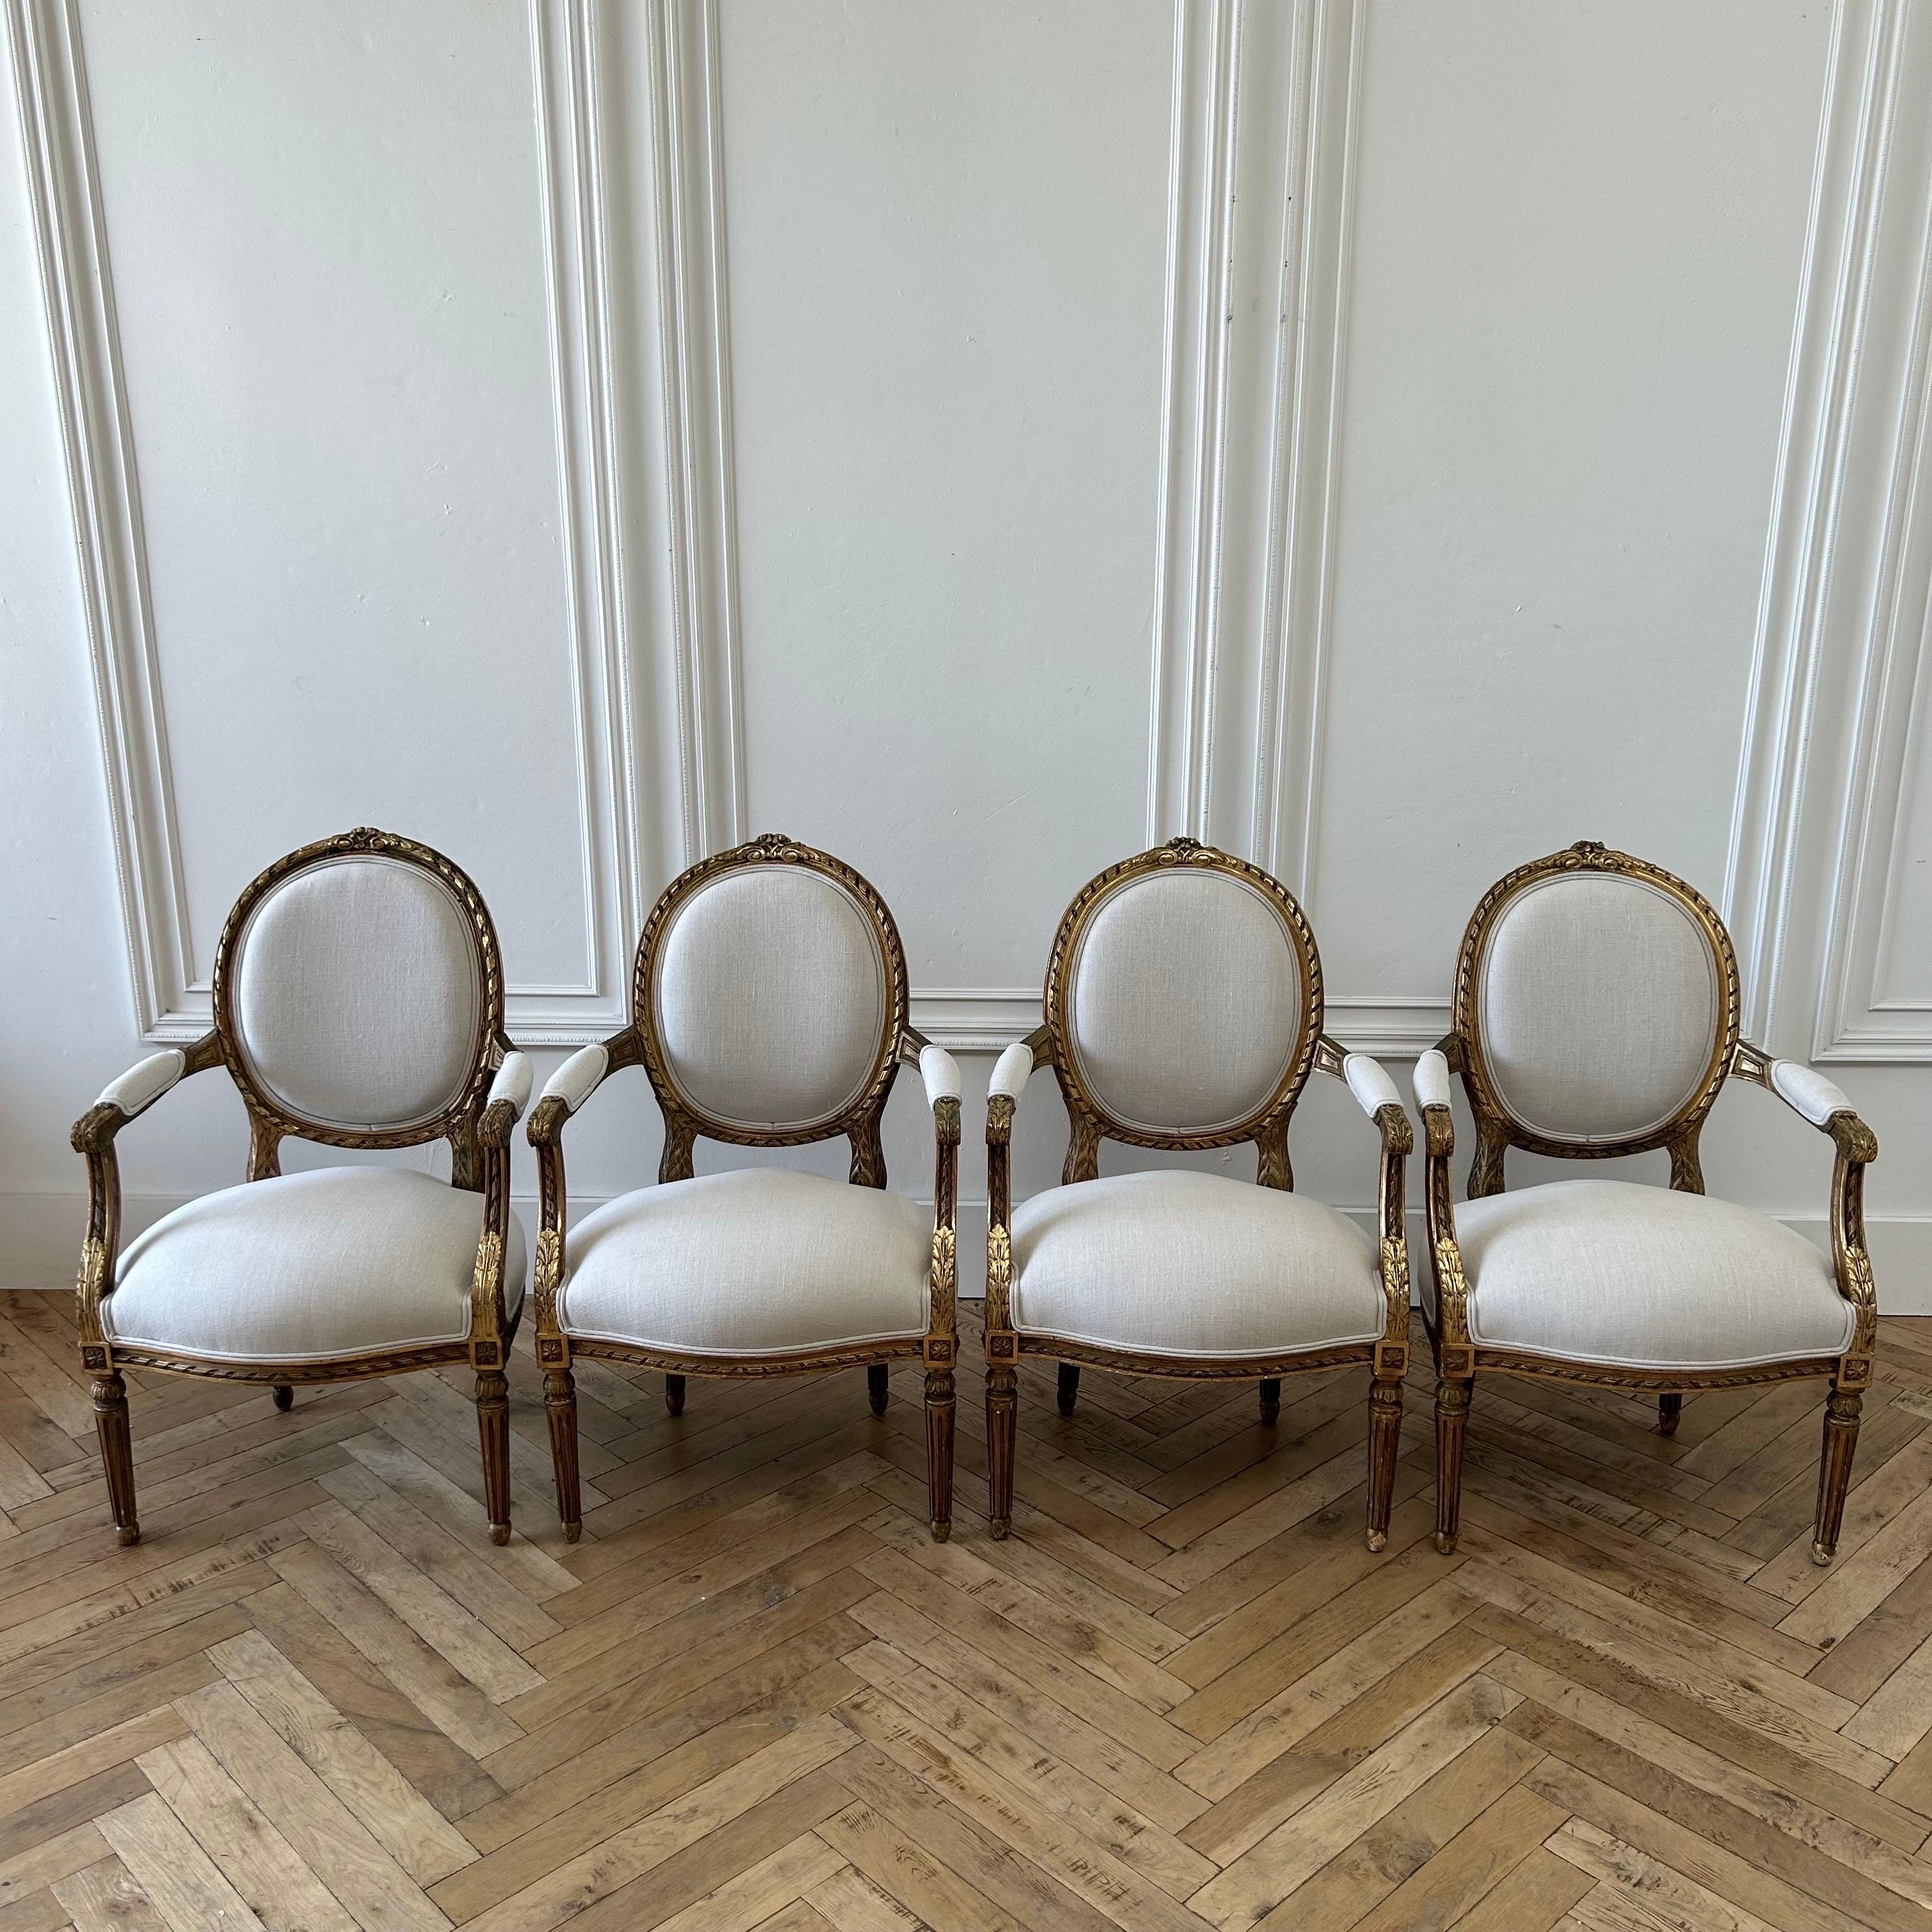 Antique French Louis XVI Style Gilt Wood Upholstered Linen Arm Chairs In Good Condition For Sale In Brea, CA